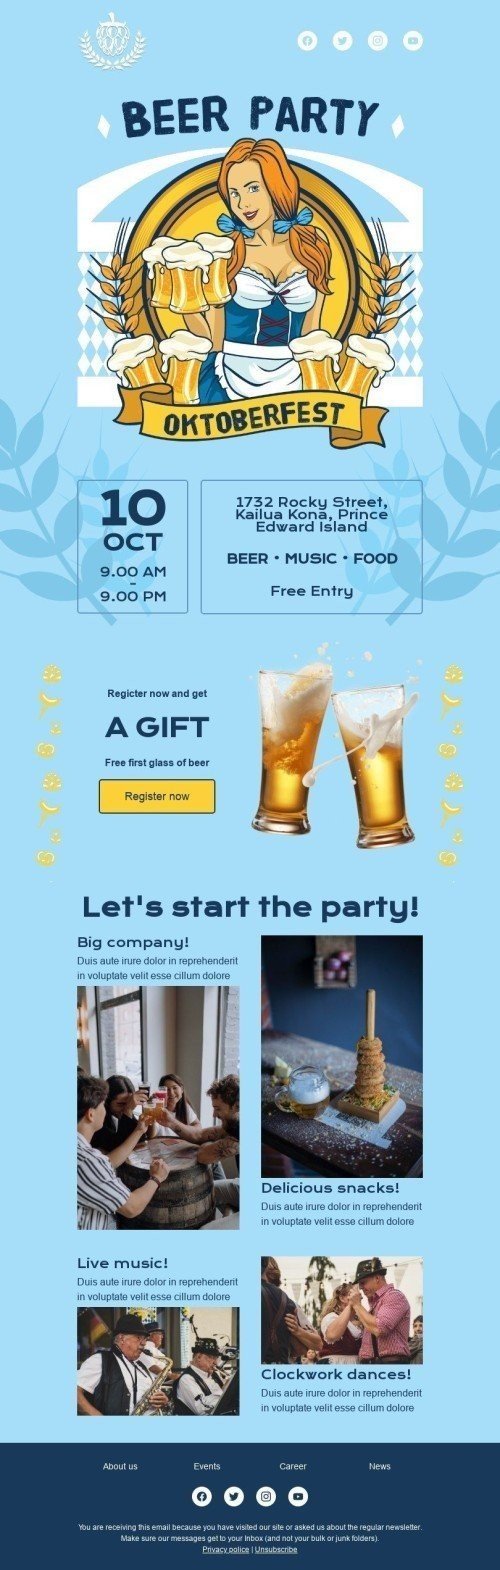 Oktoberfest Email Template "Beer party" for Hobbies industry mobile view